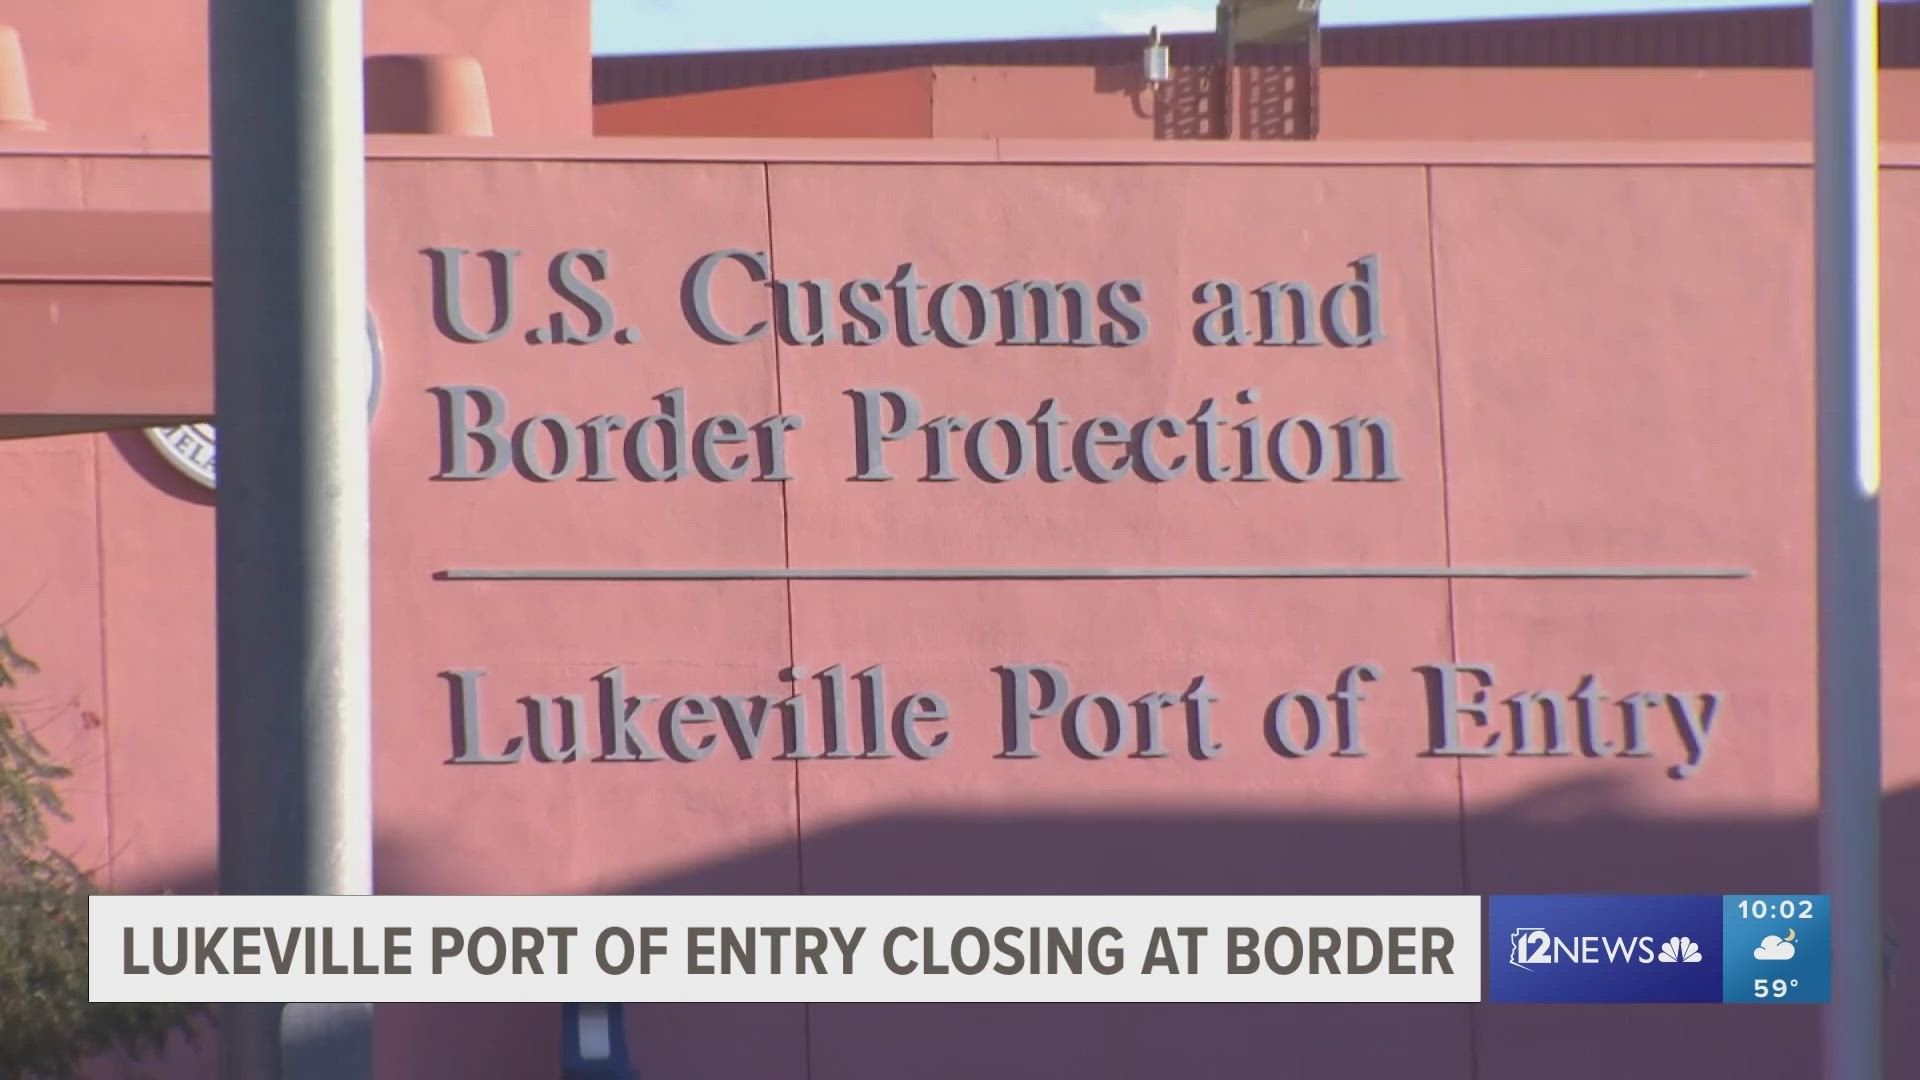 A U.S.-Mexico border crossing in Arizona previously limited vehicle traffic. Now, it's closing entirely because so many migrants are crossing from Mexico into the Un